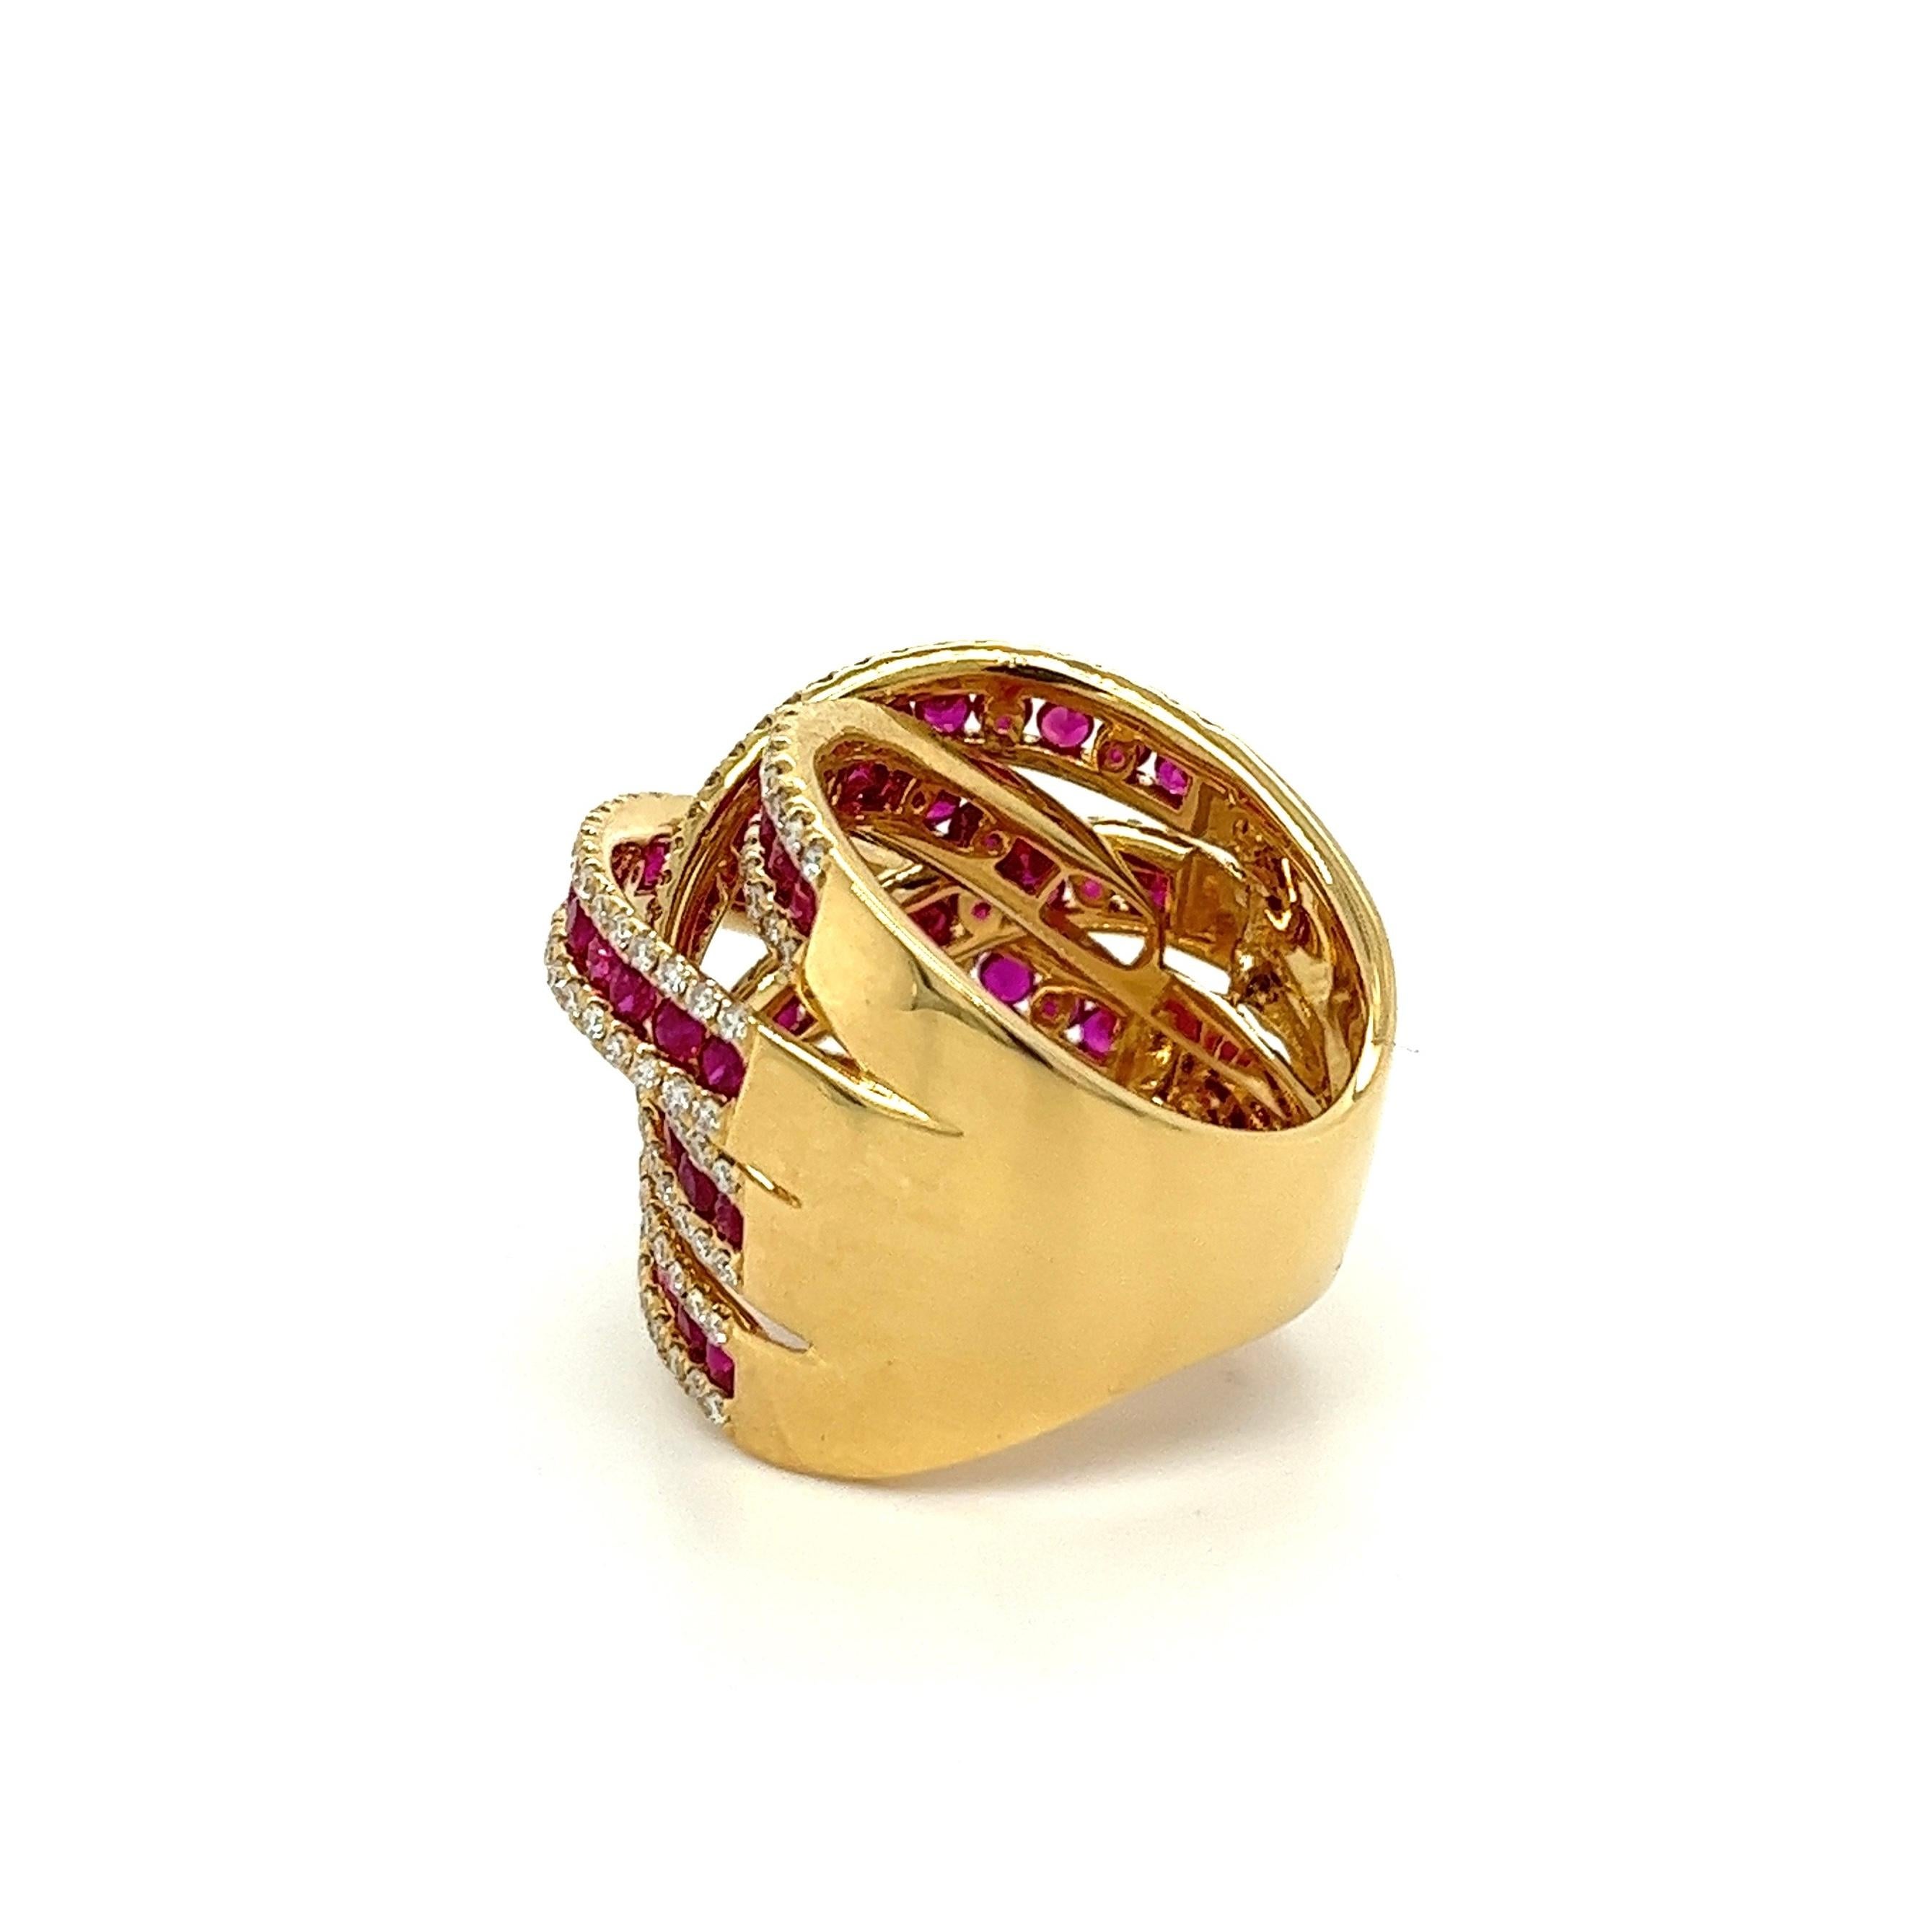 18K Rose Gold Ring with Diamonds and Rubies

18KR 15.56GM 
75MR 2.81CT 
220RD 1.49CT

Introducing our 18K rose gold ring,  a stunning work of art that combines the finest materials with expert craftsmanship. This exquisite ring features a beautiful